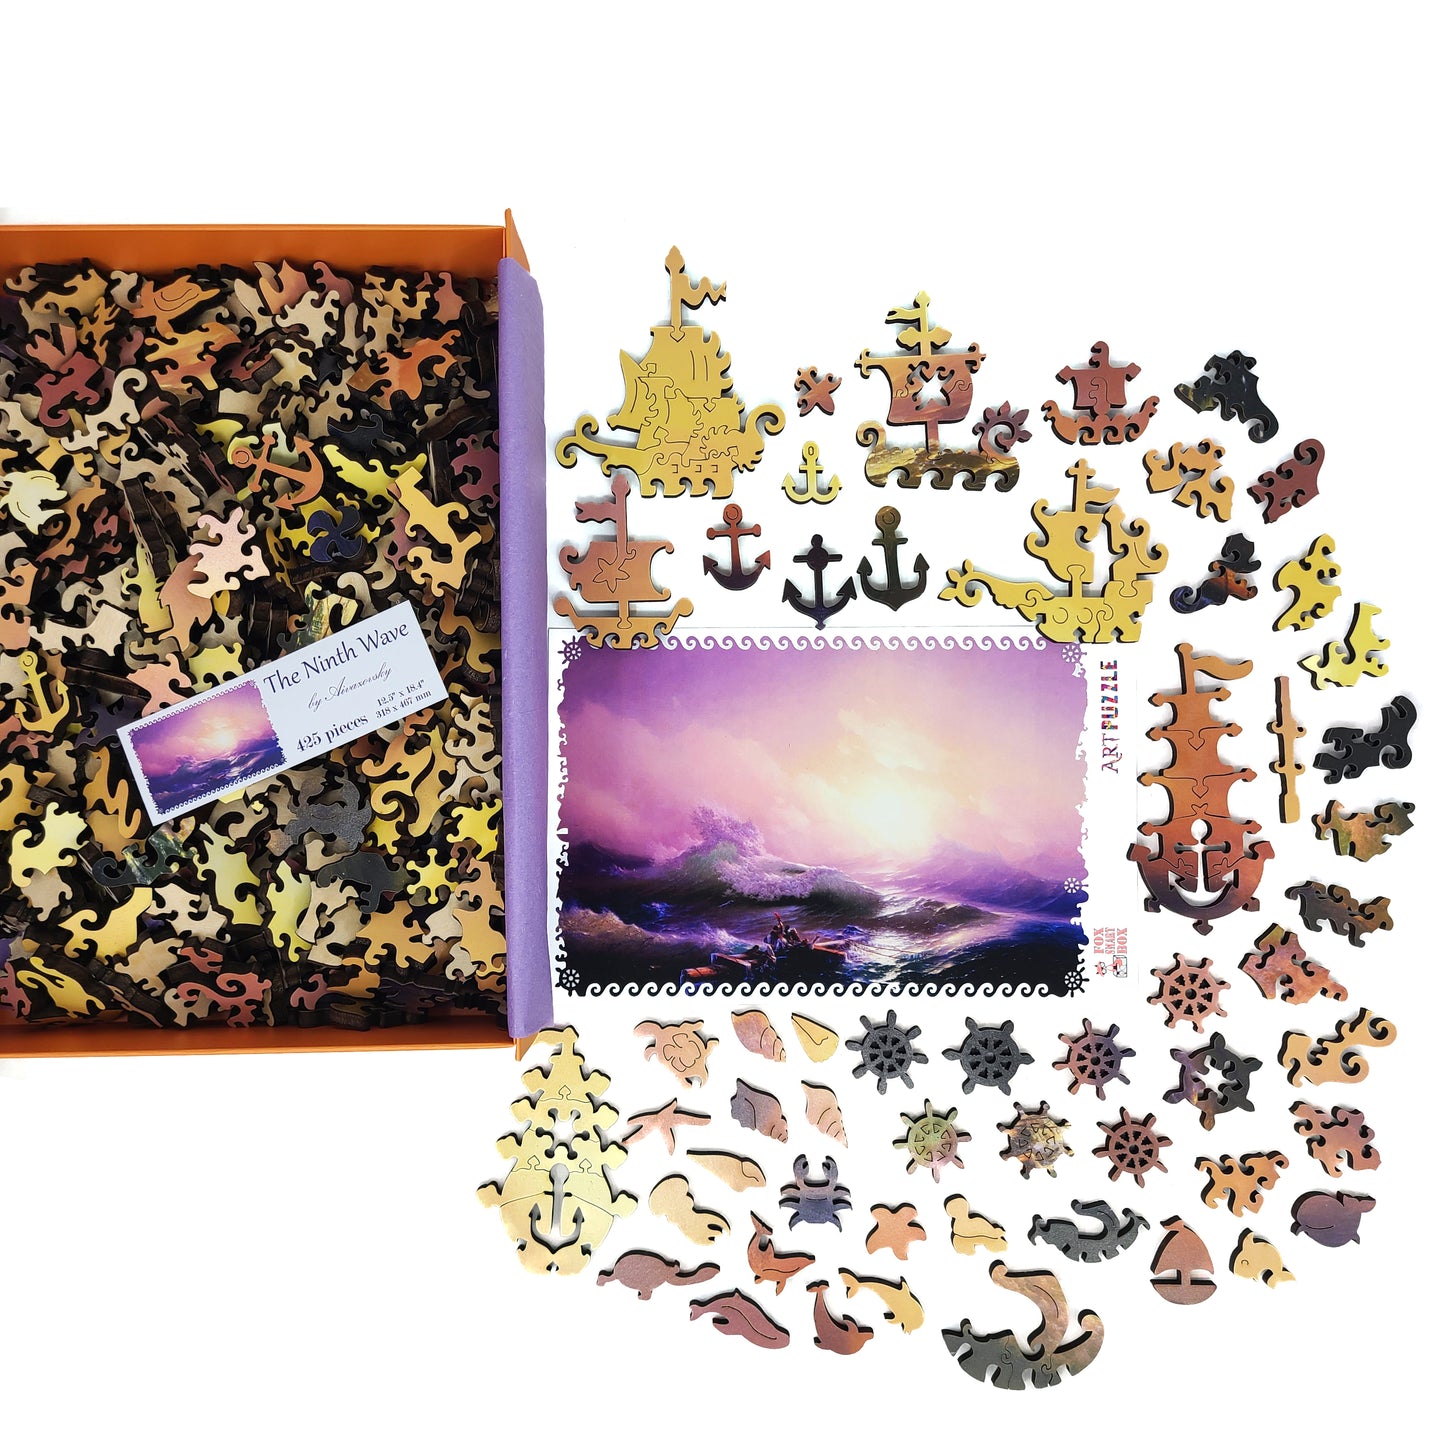 Wooden Jigsaw Puzzle with Uniquely Shaped Pieces for Adults - 425 Pieces - The Ninth Wave